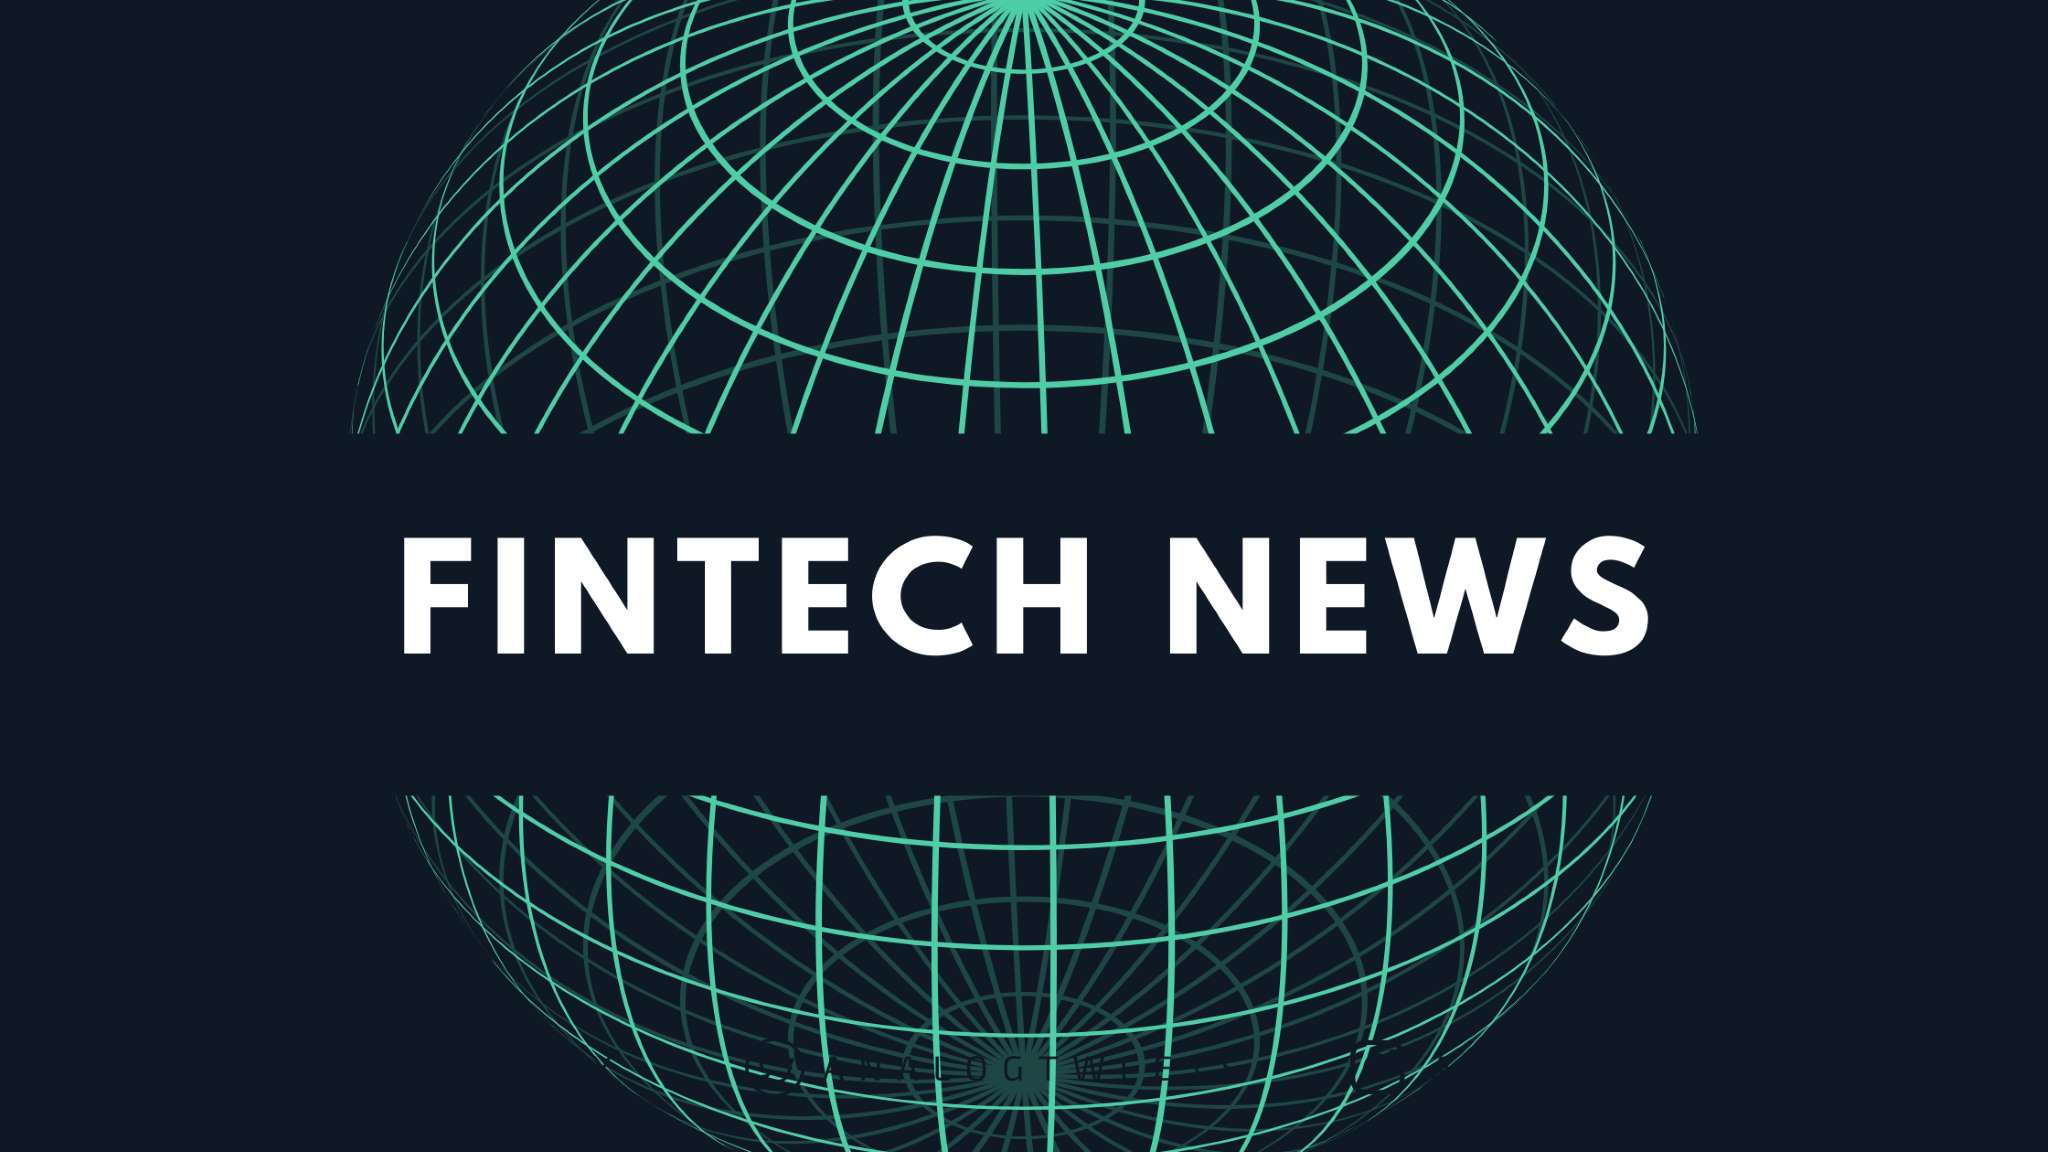 Top 10 Fintech News Stories for the Week Ending January 7, 2023